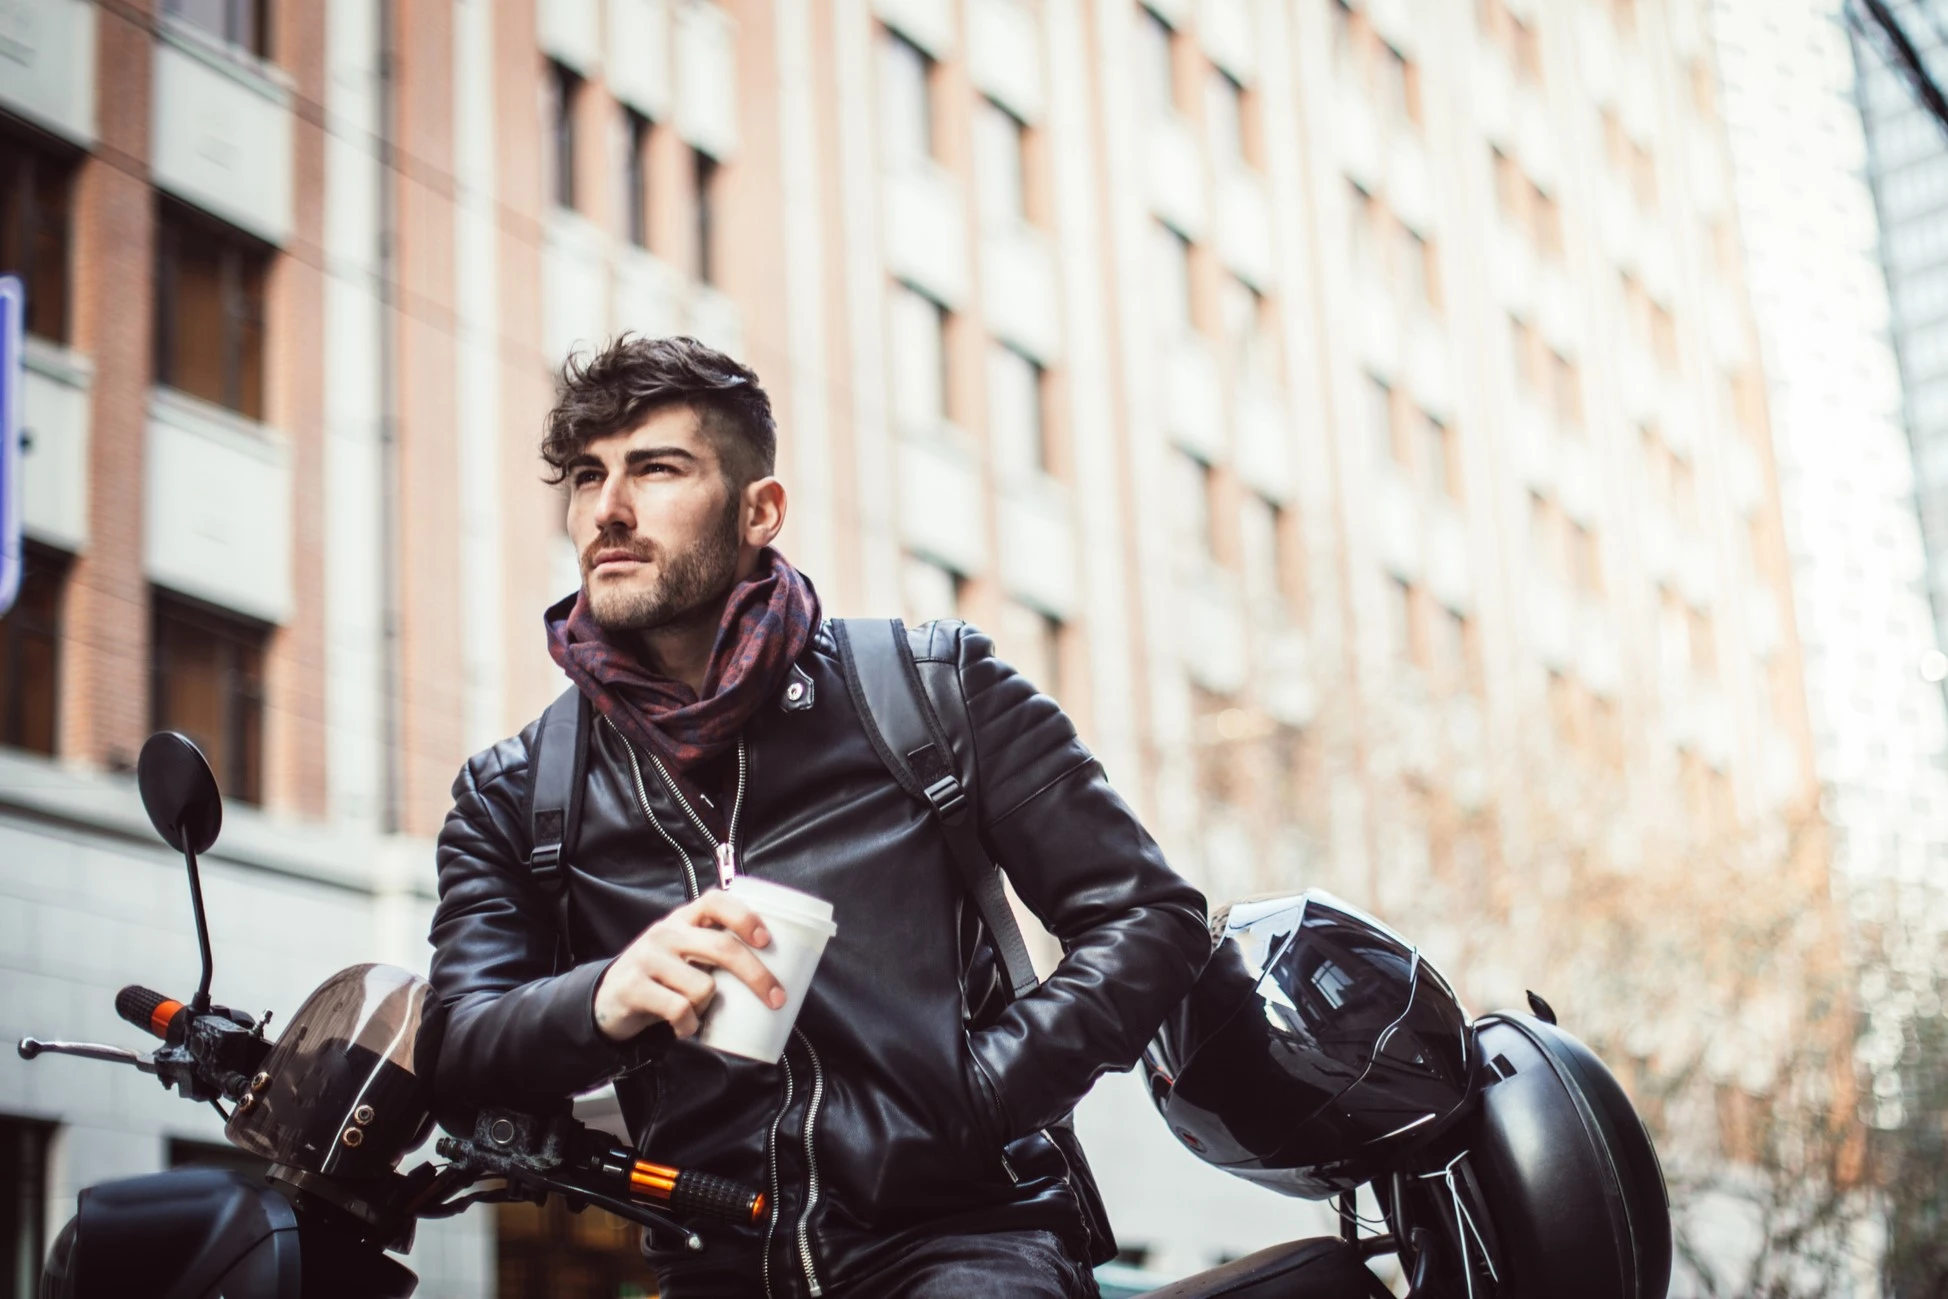 How To Get the Confidence That Comes With Wearing a Men’s Motorcycle Jacket